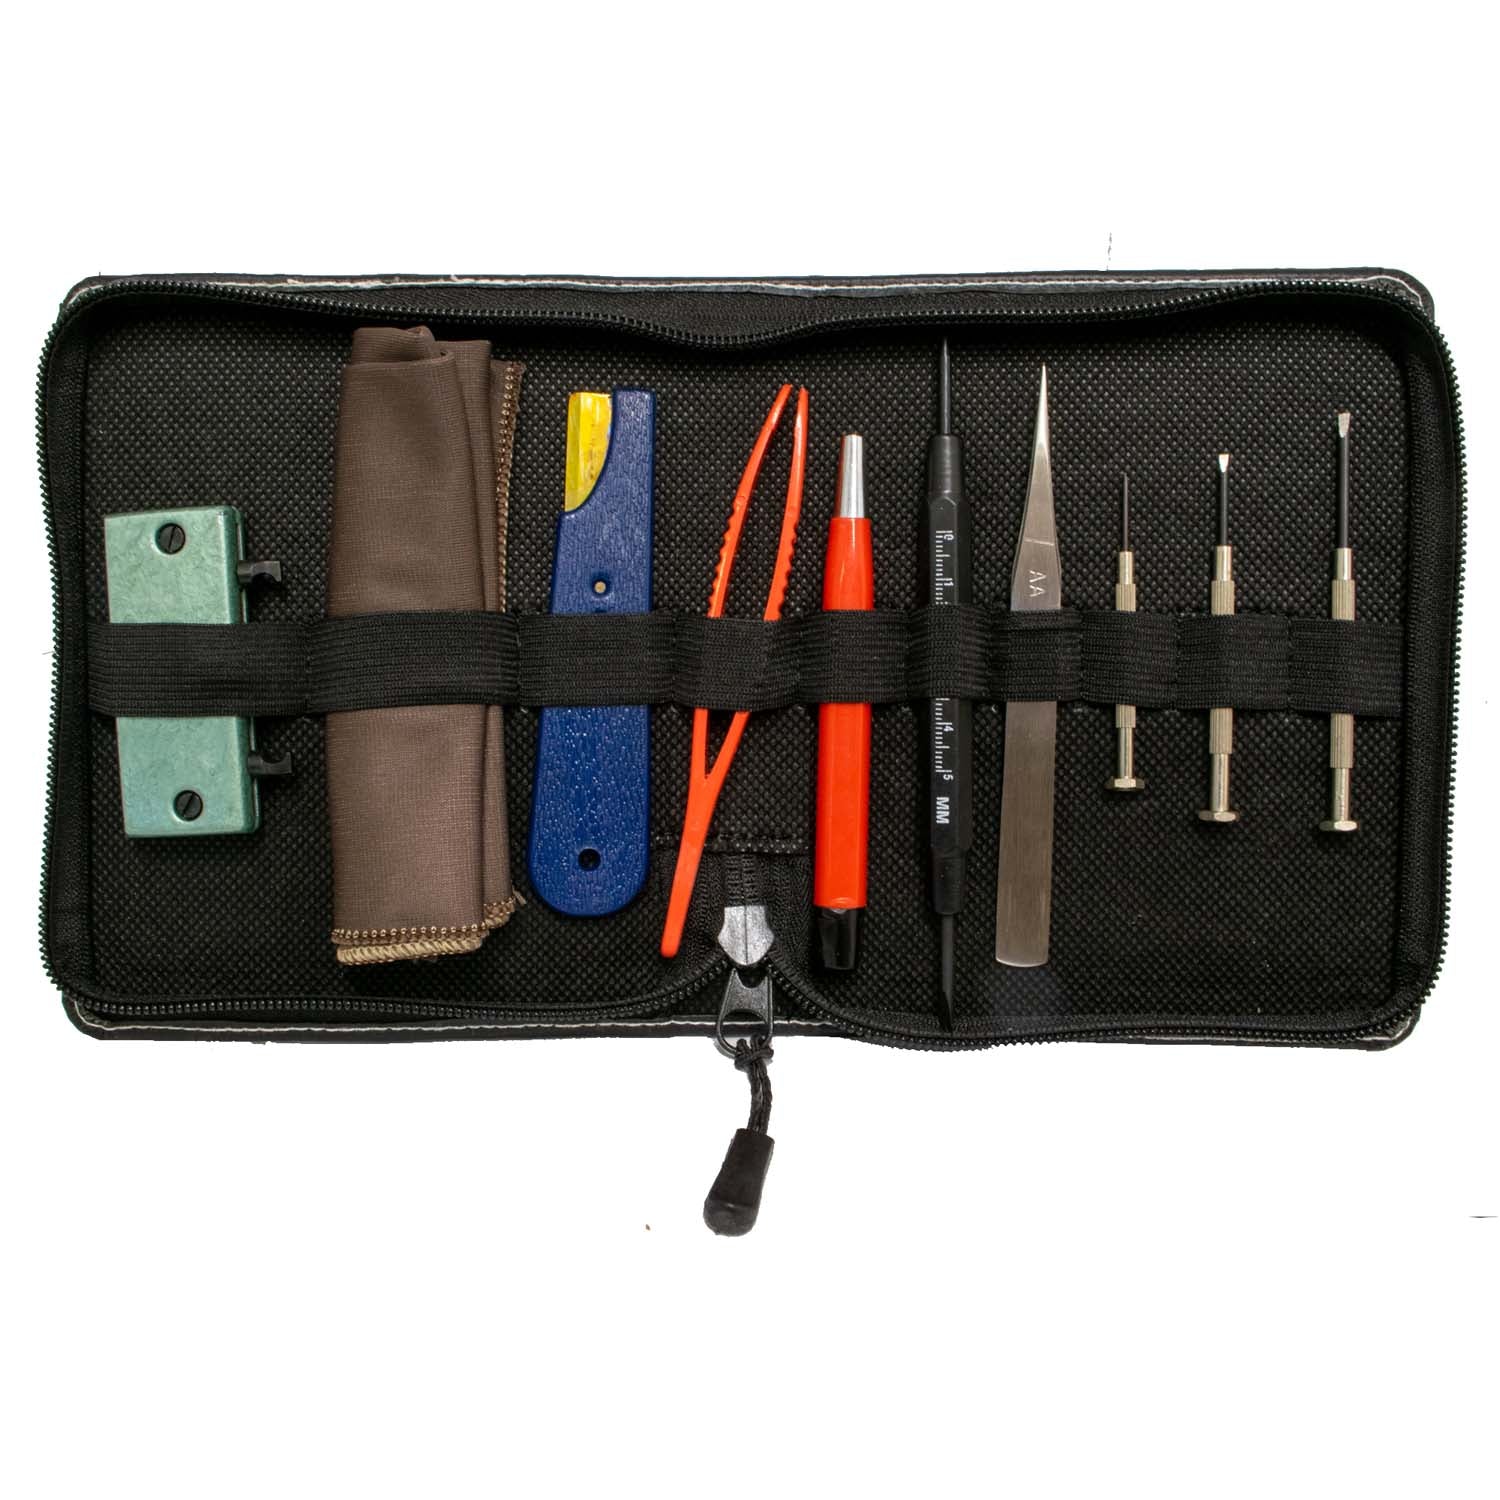 Tool set for changing watch batteries